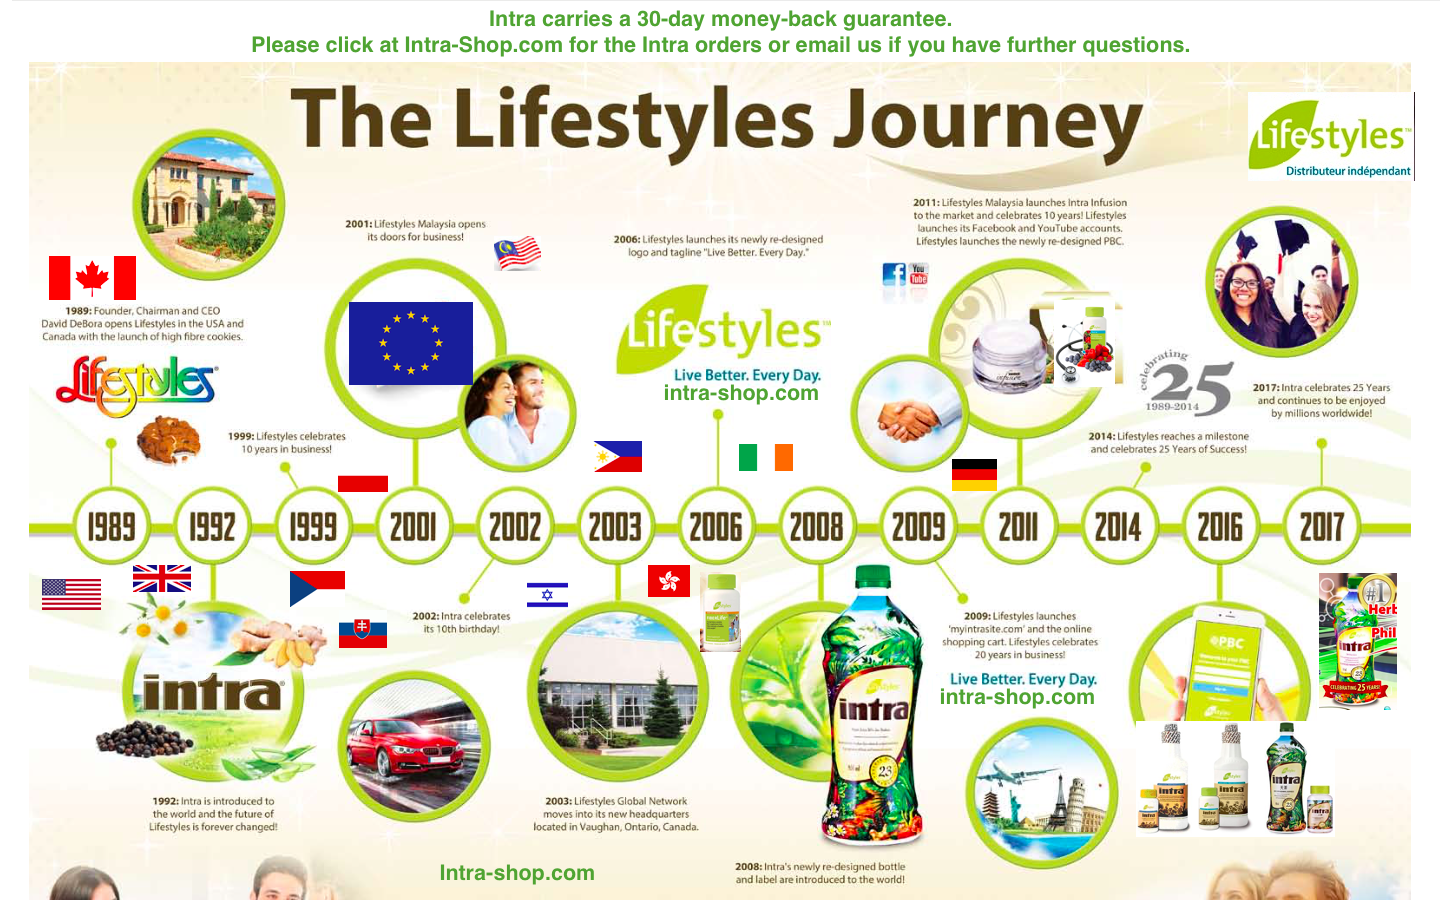 The LIfestyles Canada Journey